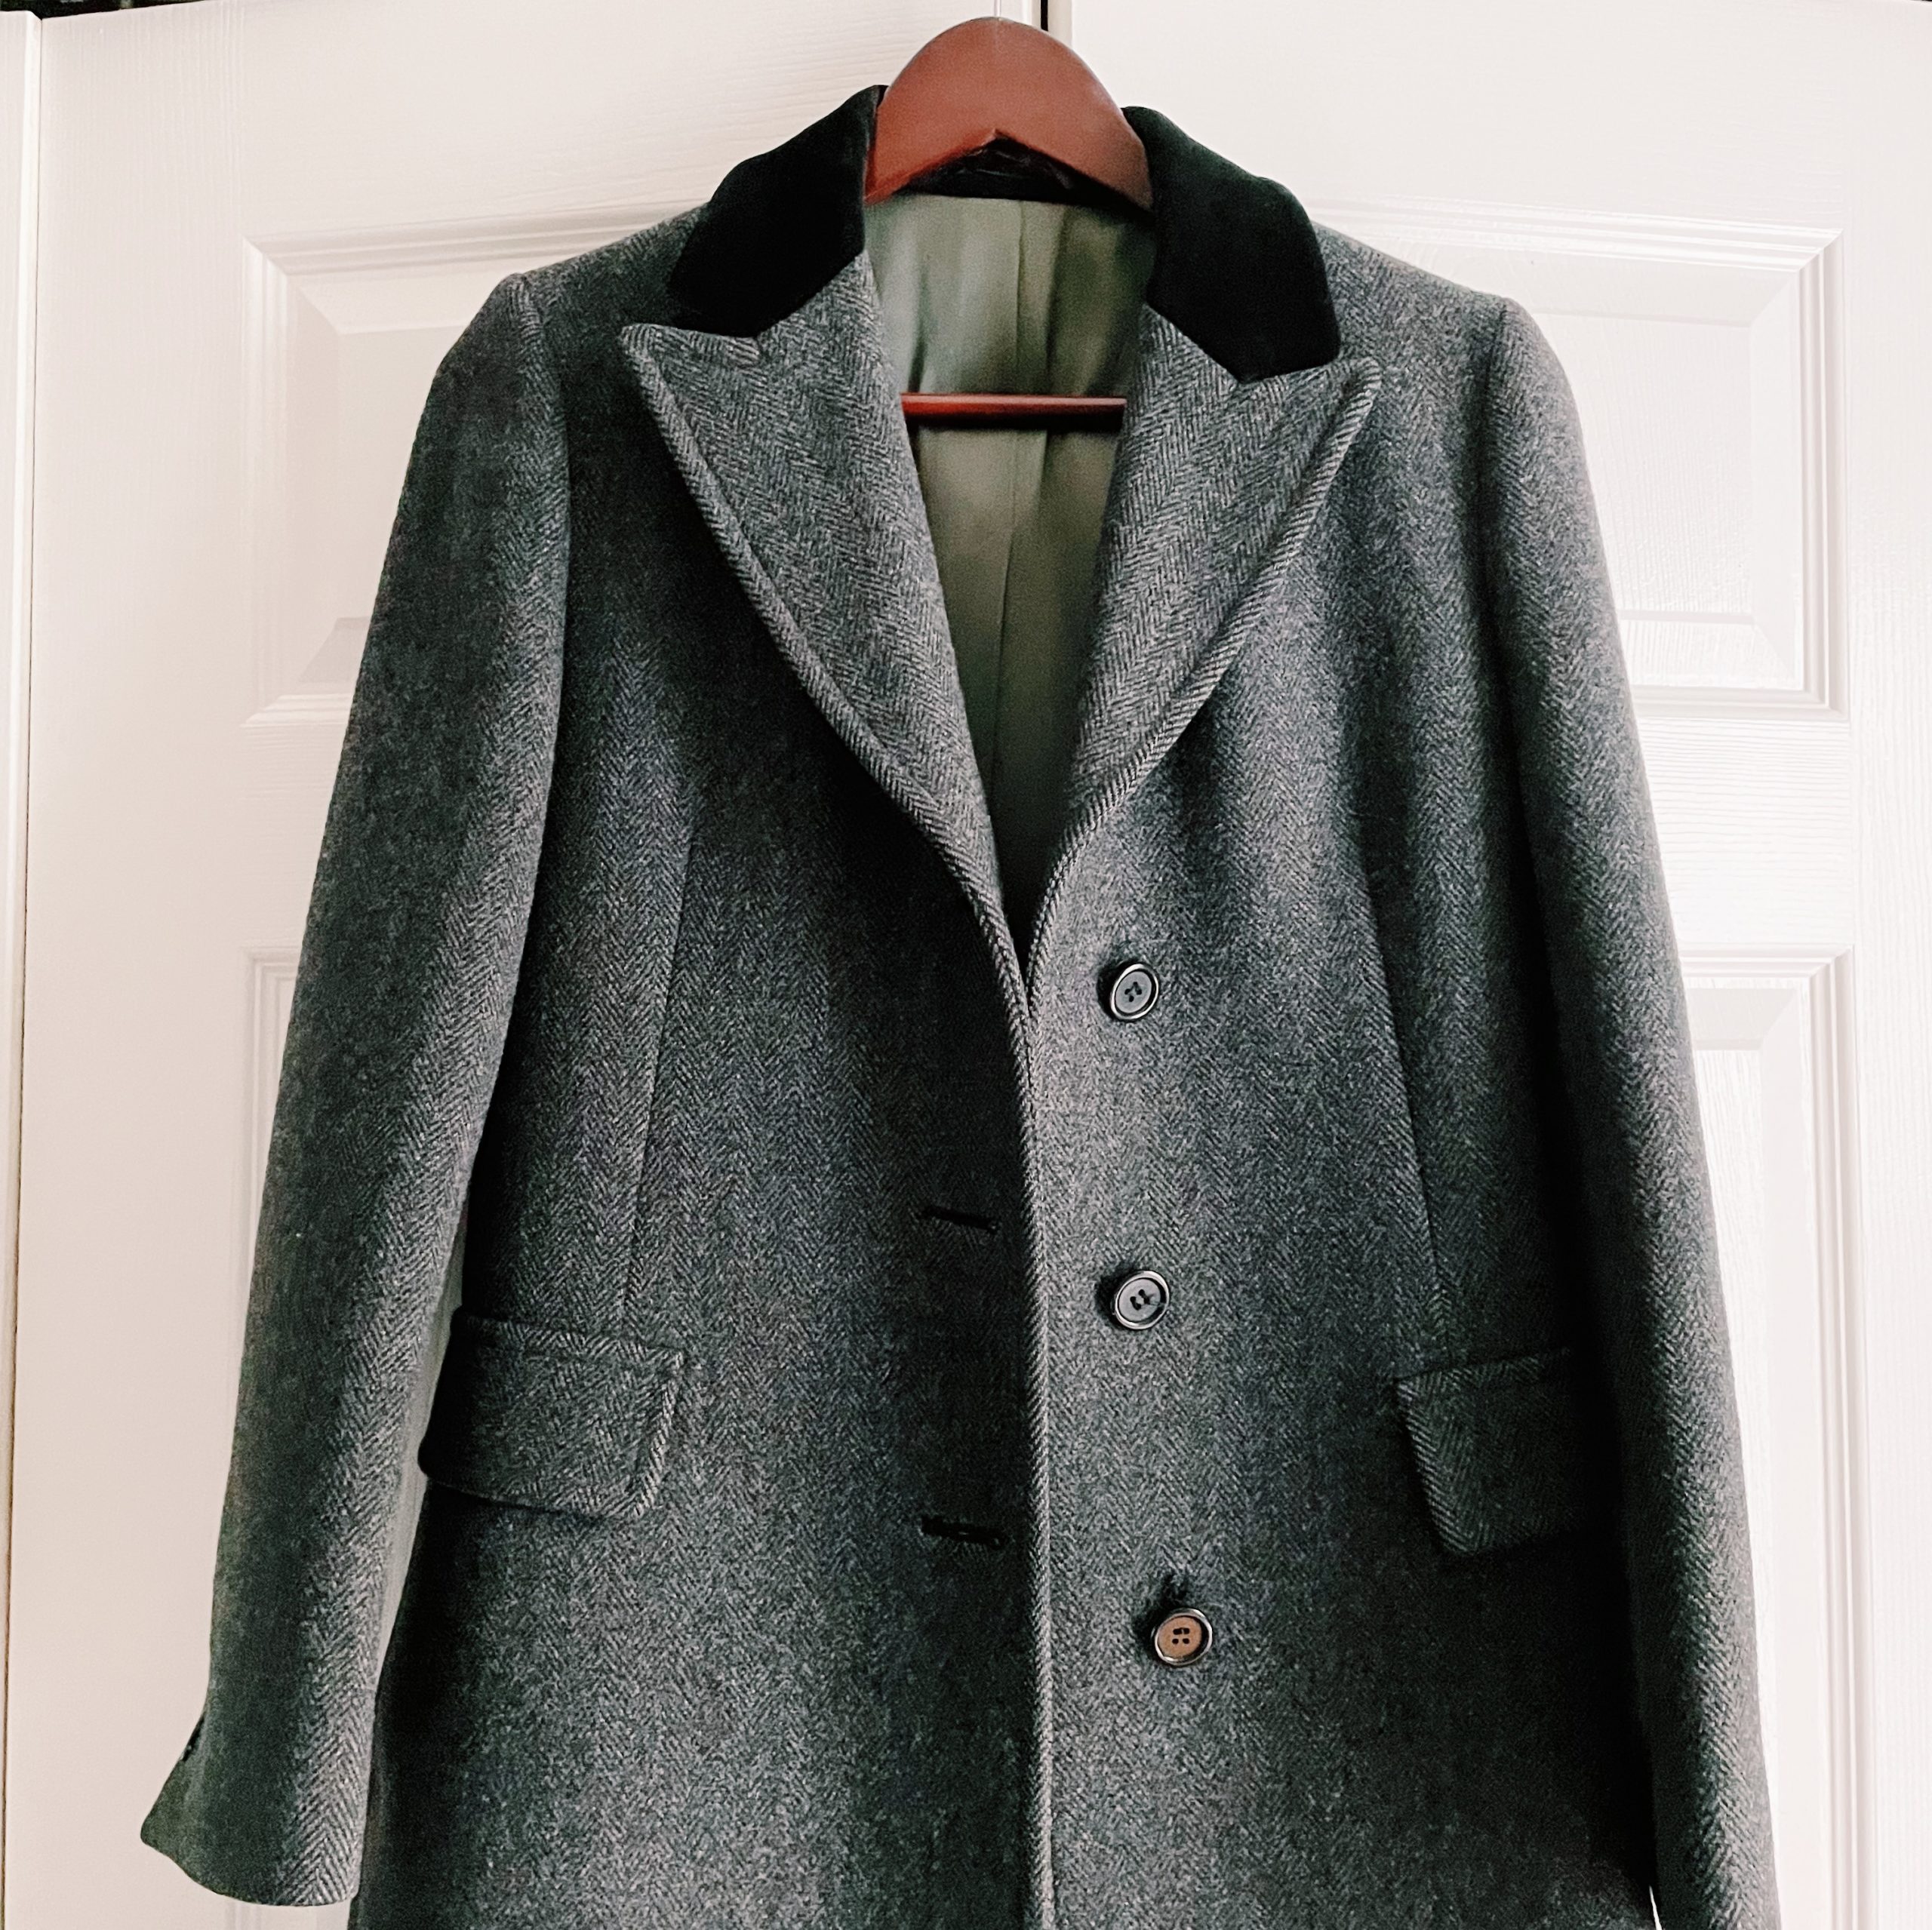 A Mile in Her Clothes: My Mother’s Overcoat